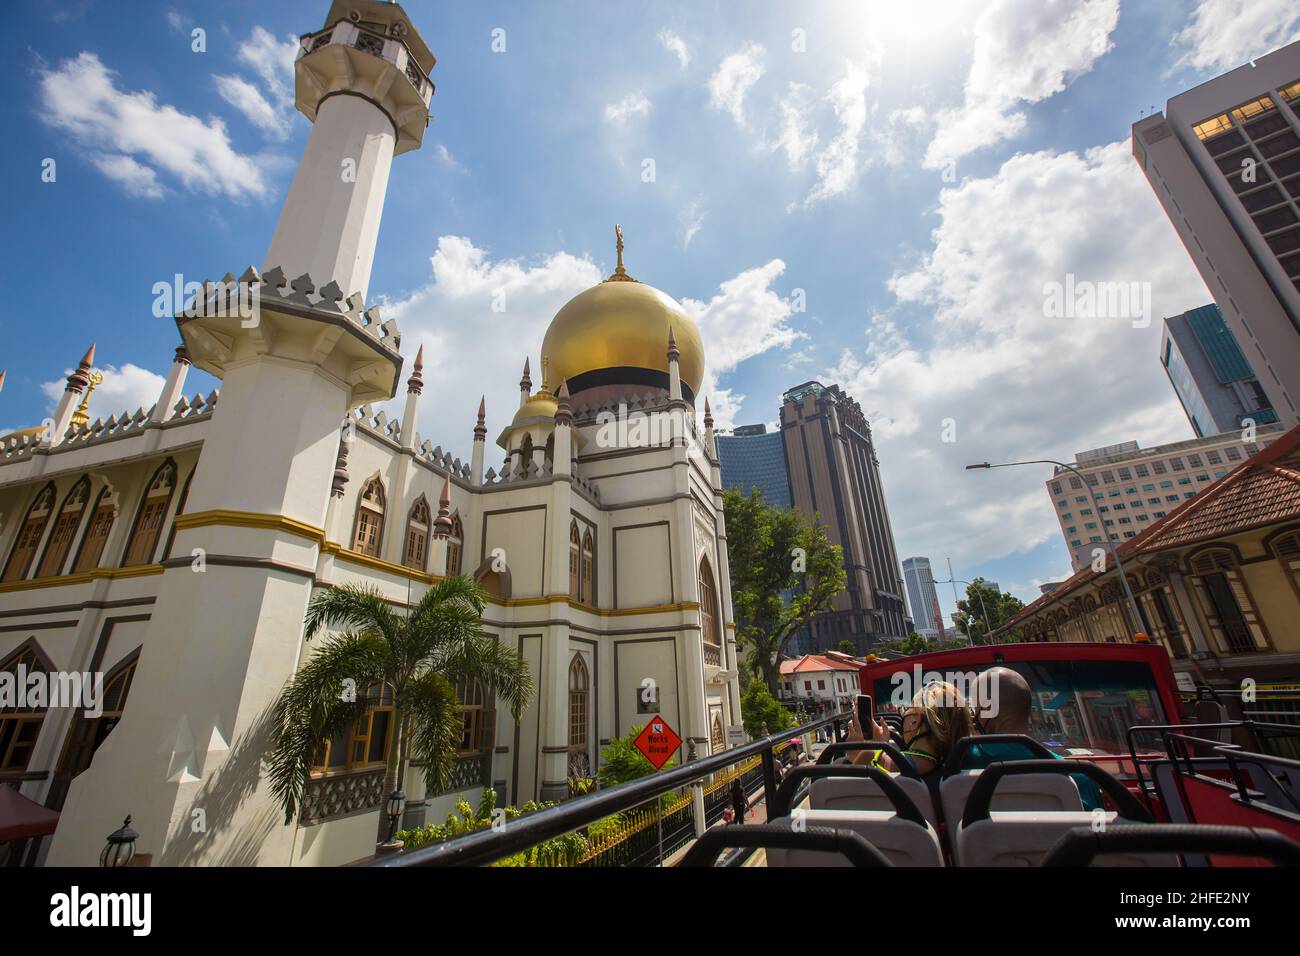 View from open top bus in Singapore, Kampong district. Looking up at the stunning gold dome of Masjid Sultan also know as Sultan Mosque. January 2022 Stock Photo